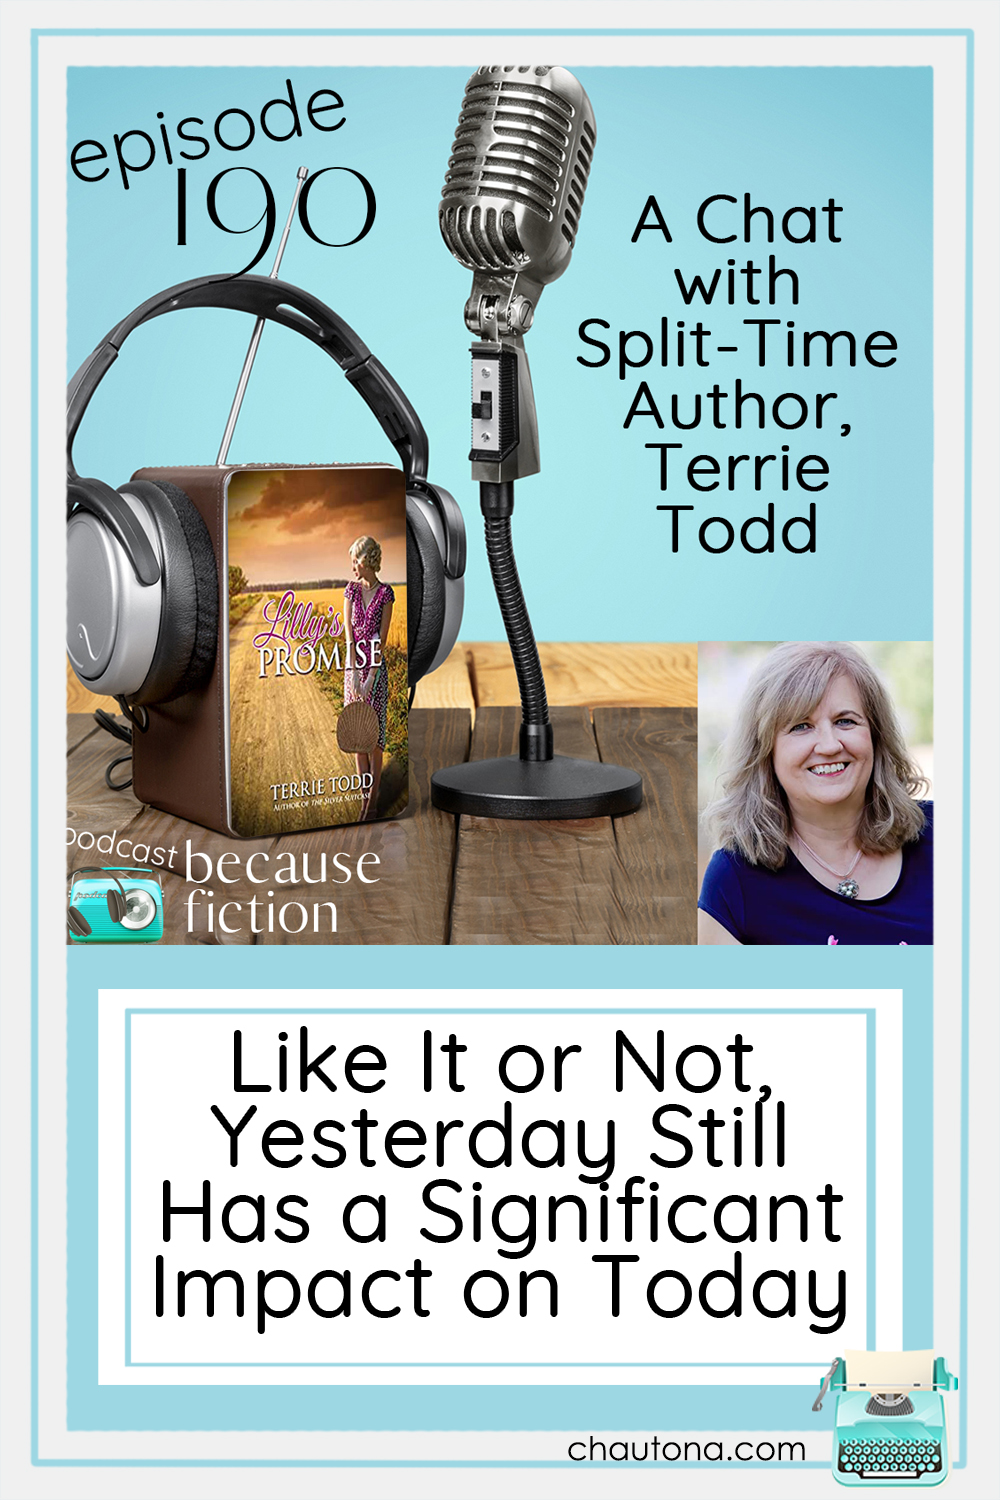 Lilly's Promise by Terrie Todd is an award-winning split-time book that will keep you riveted to both timelines! via @chautonahavig